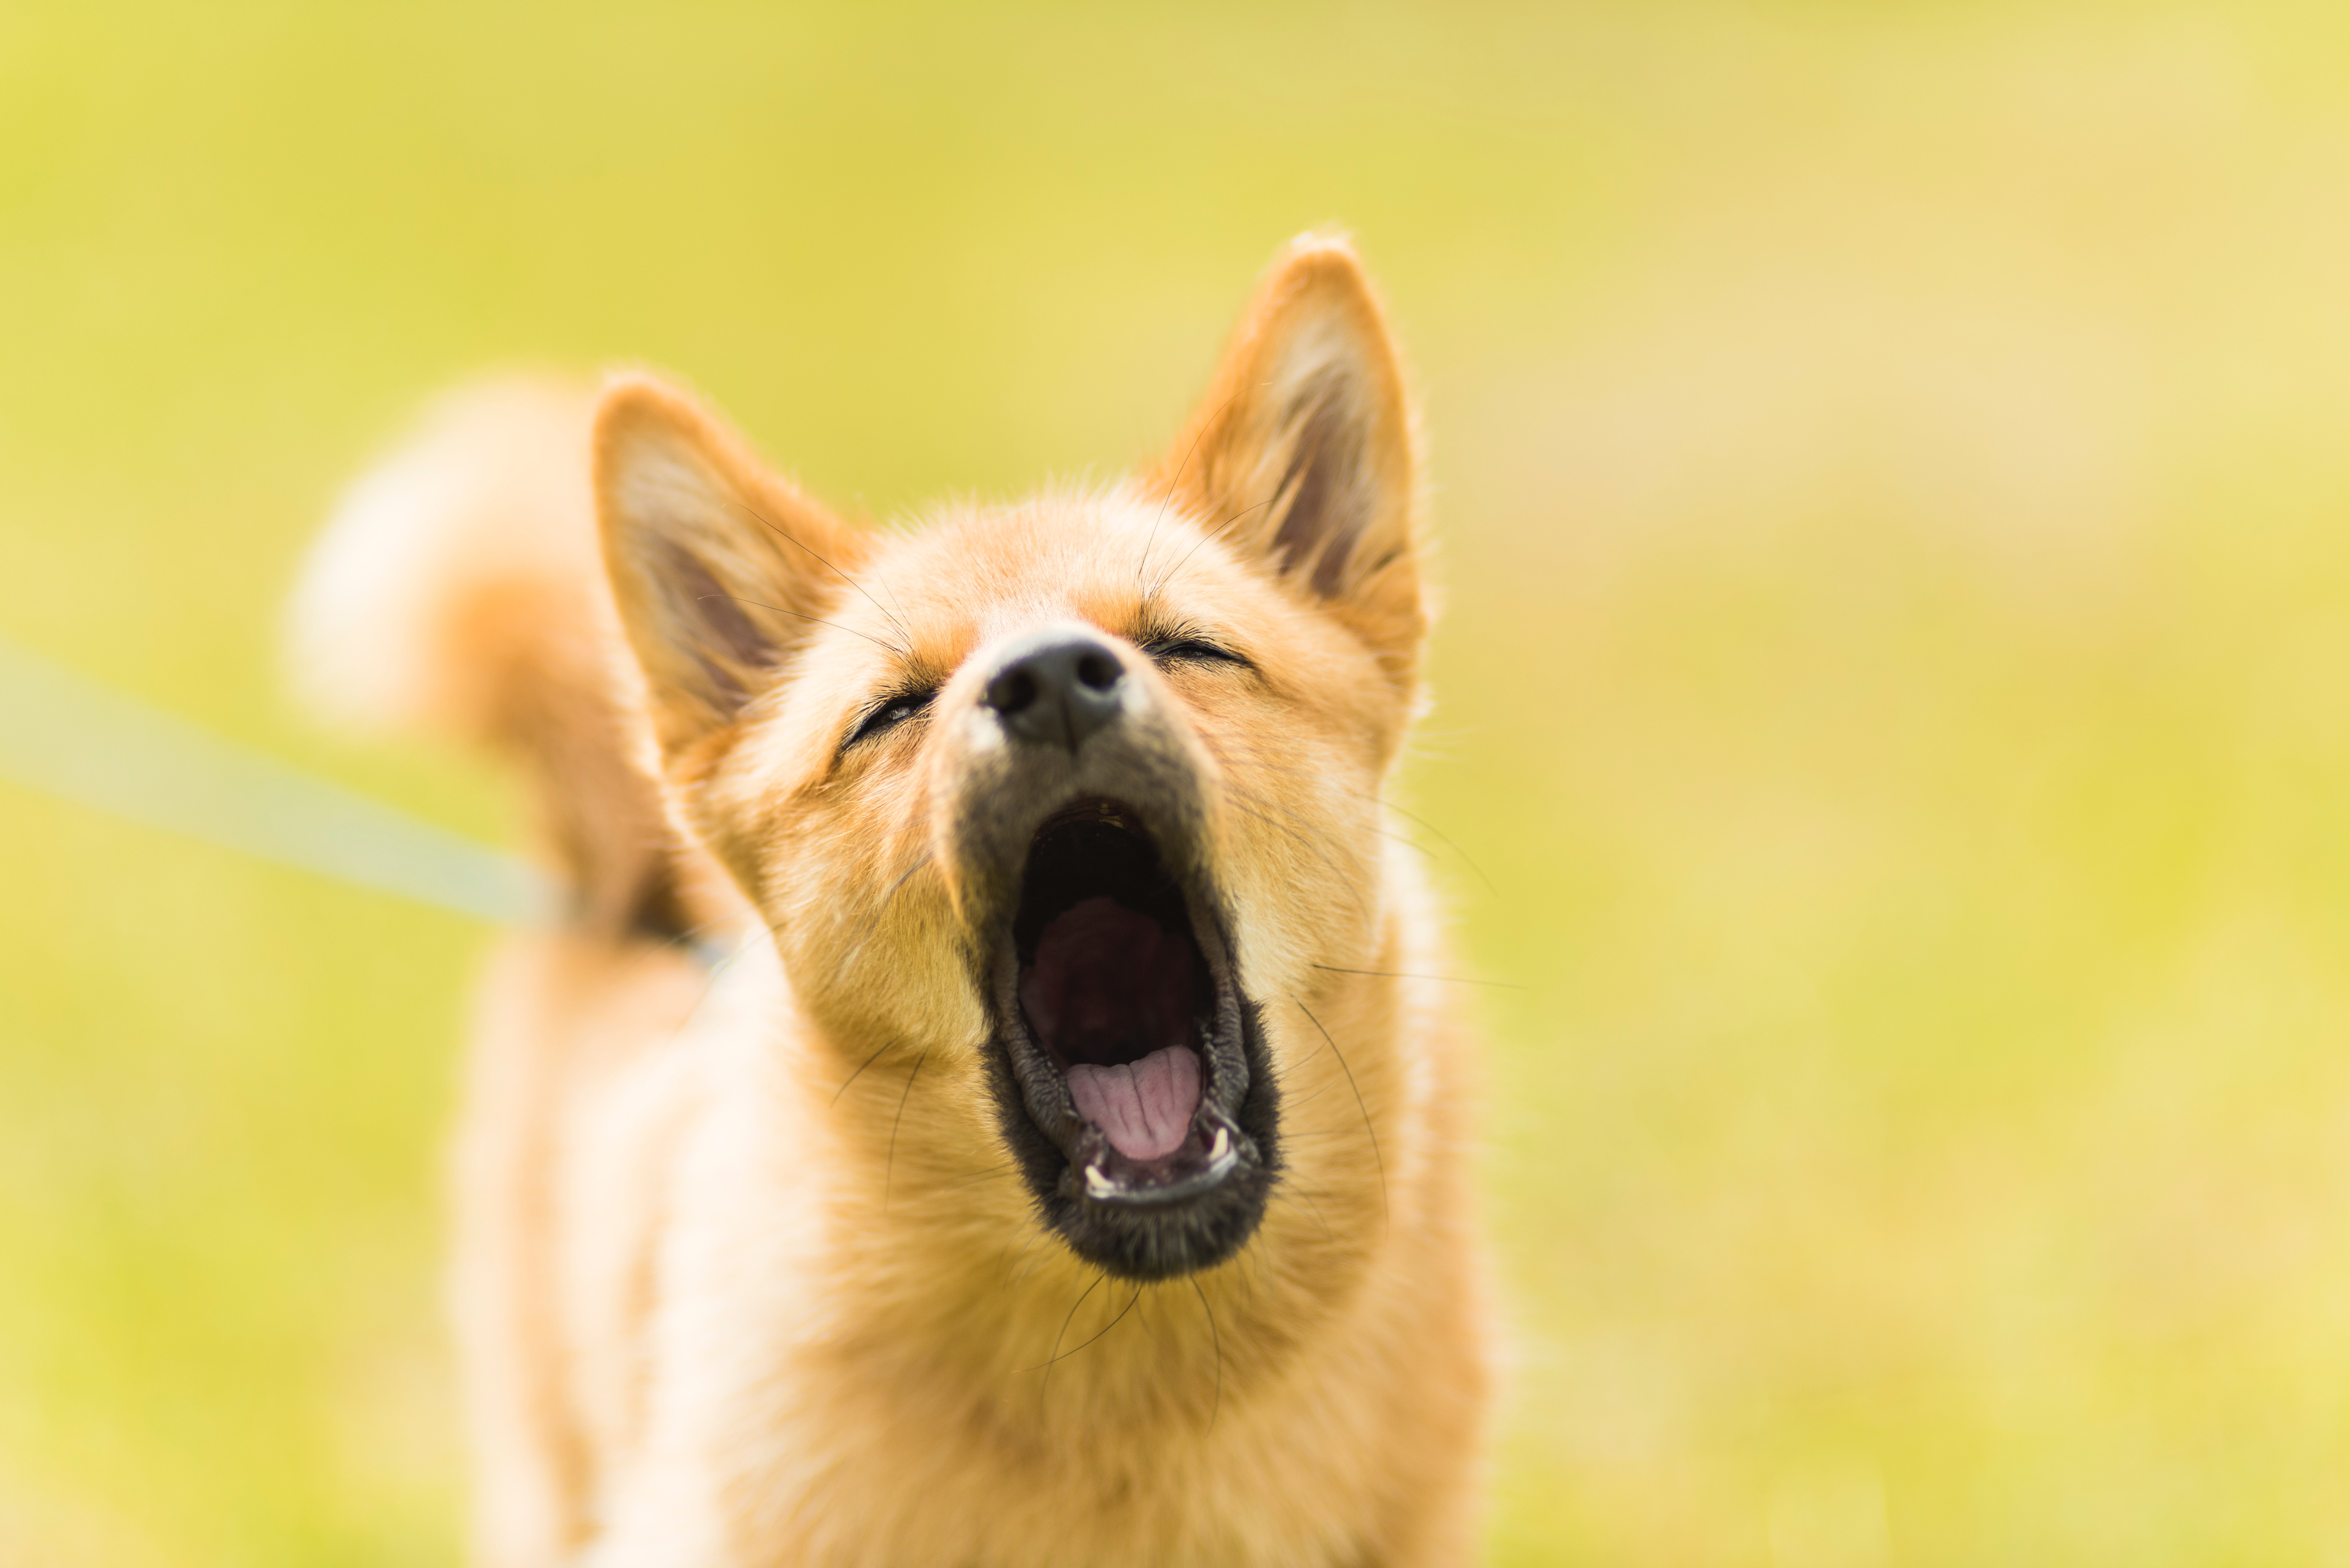 Why Dogs Bark & How To Stop Excessive Barking